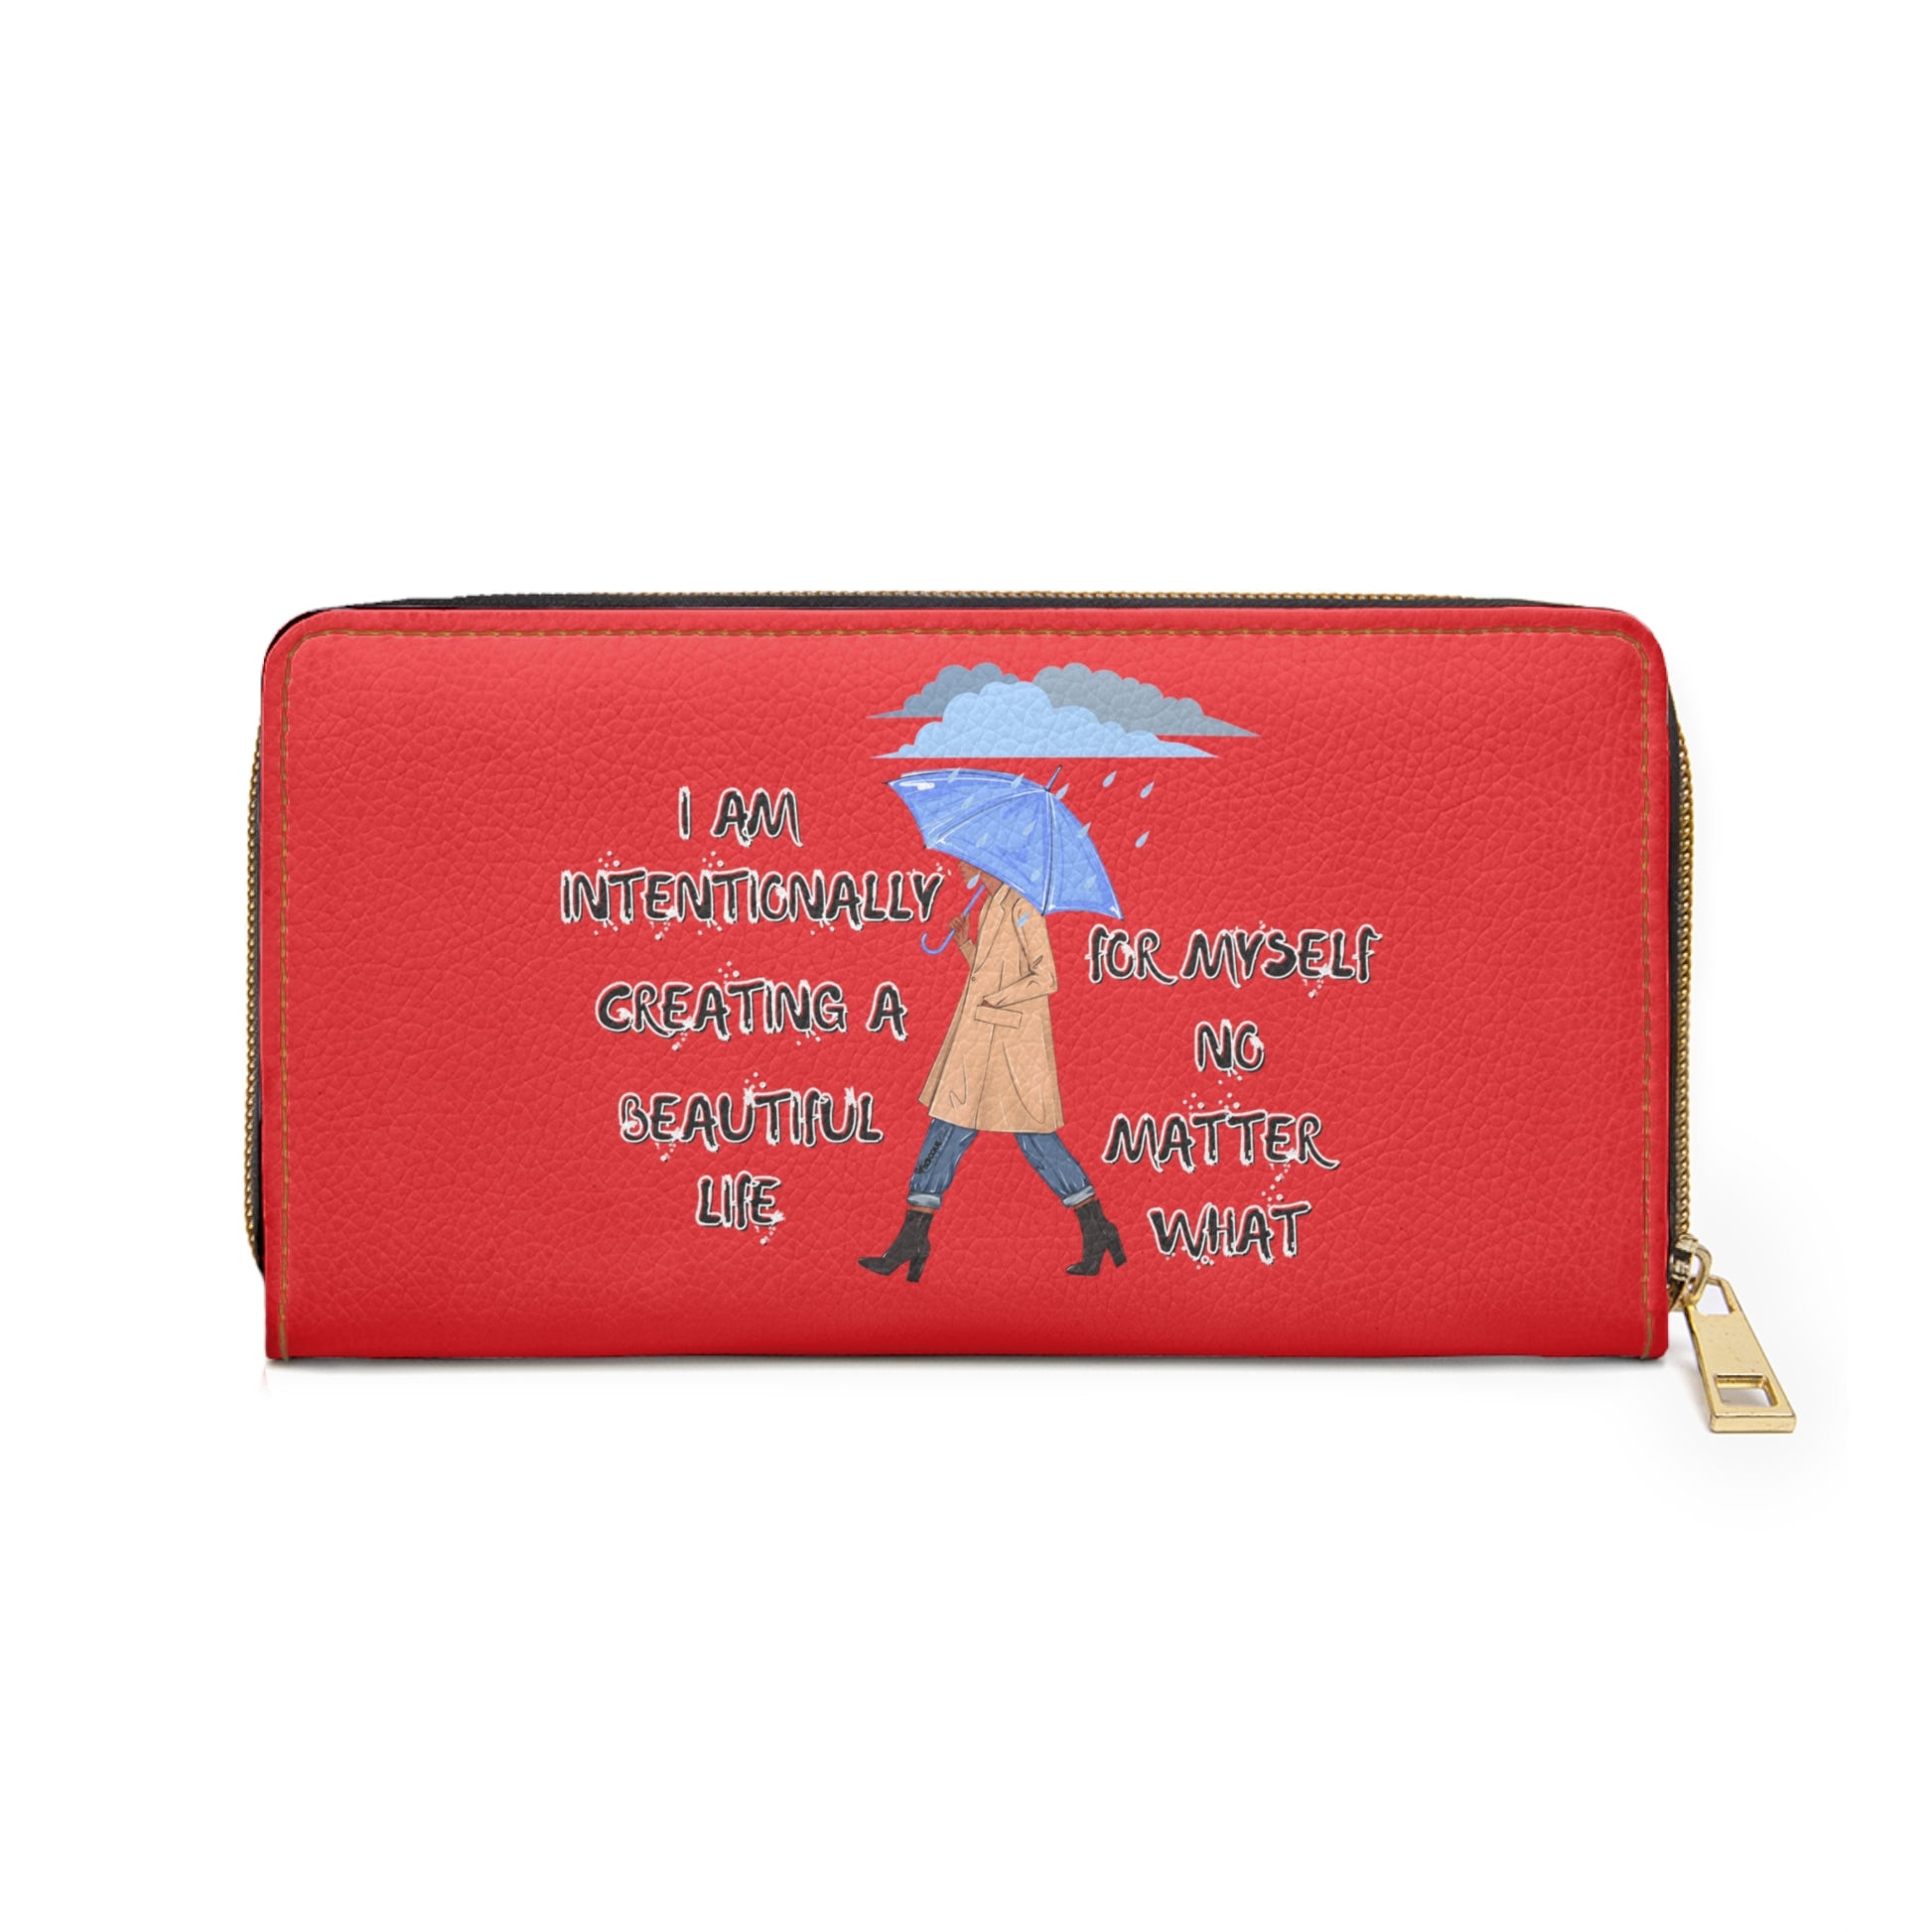 "I AM Intentionally Creating A Beautiful Life"- Positive Afrocentric Affirmation Vegan Leather Wallet Bag- Empower Your Style and Self-Love' ; Red Wallet